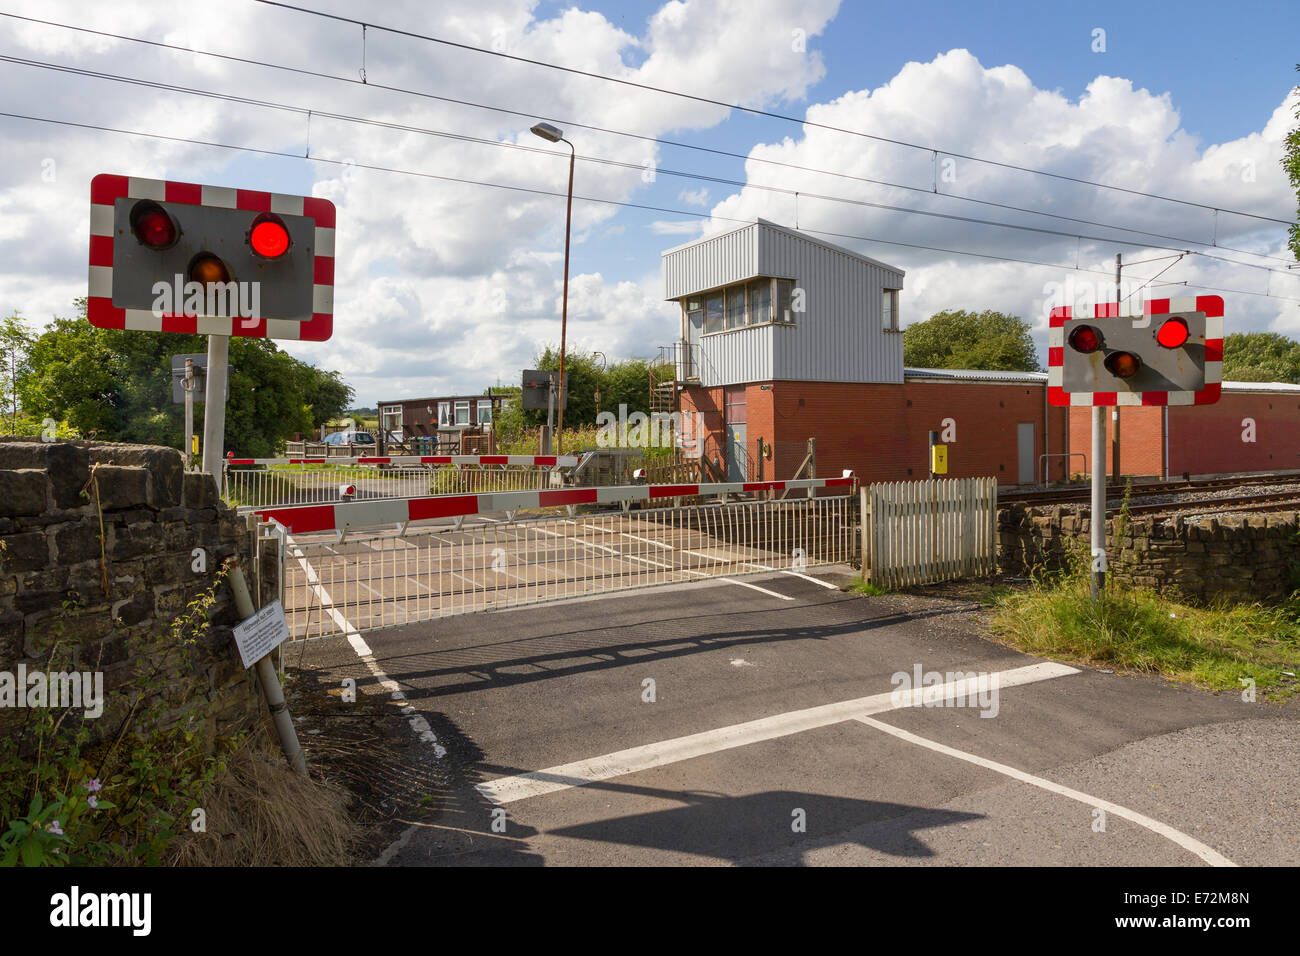 Train Tram Hagside Level Crossing With Disused Signal Box Signals And Barriers Lowered In Manchester Stock Photo Alamy